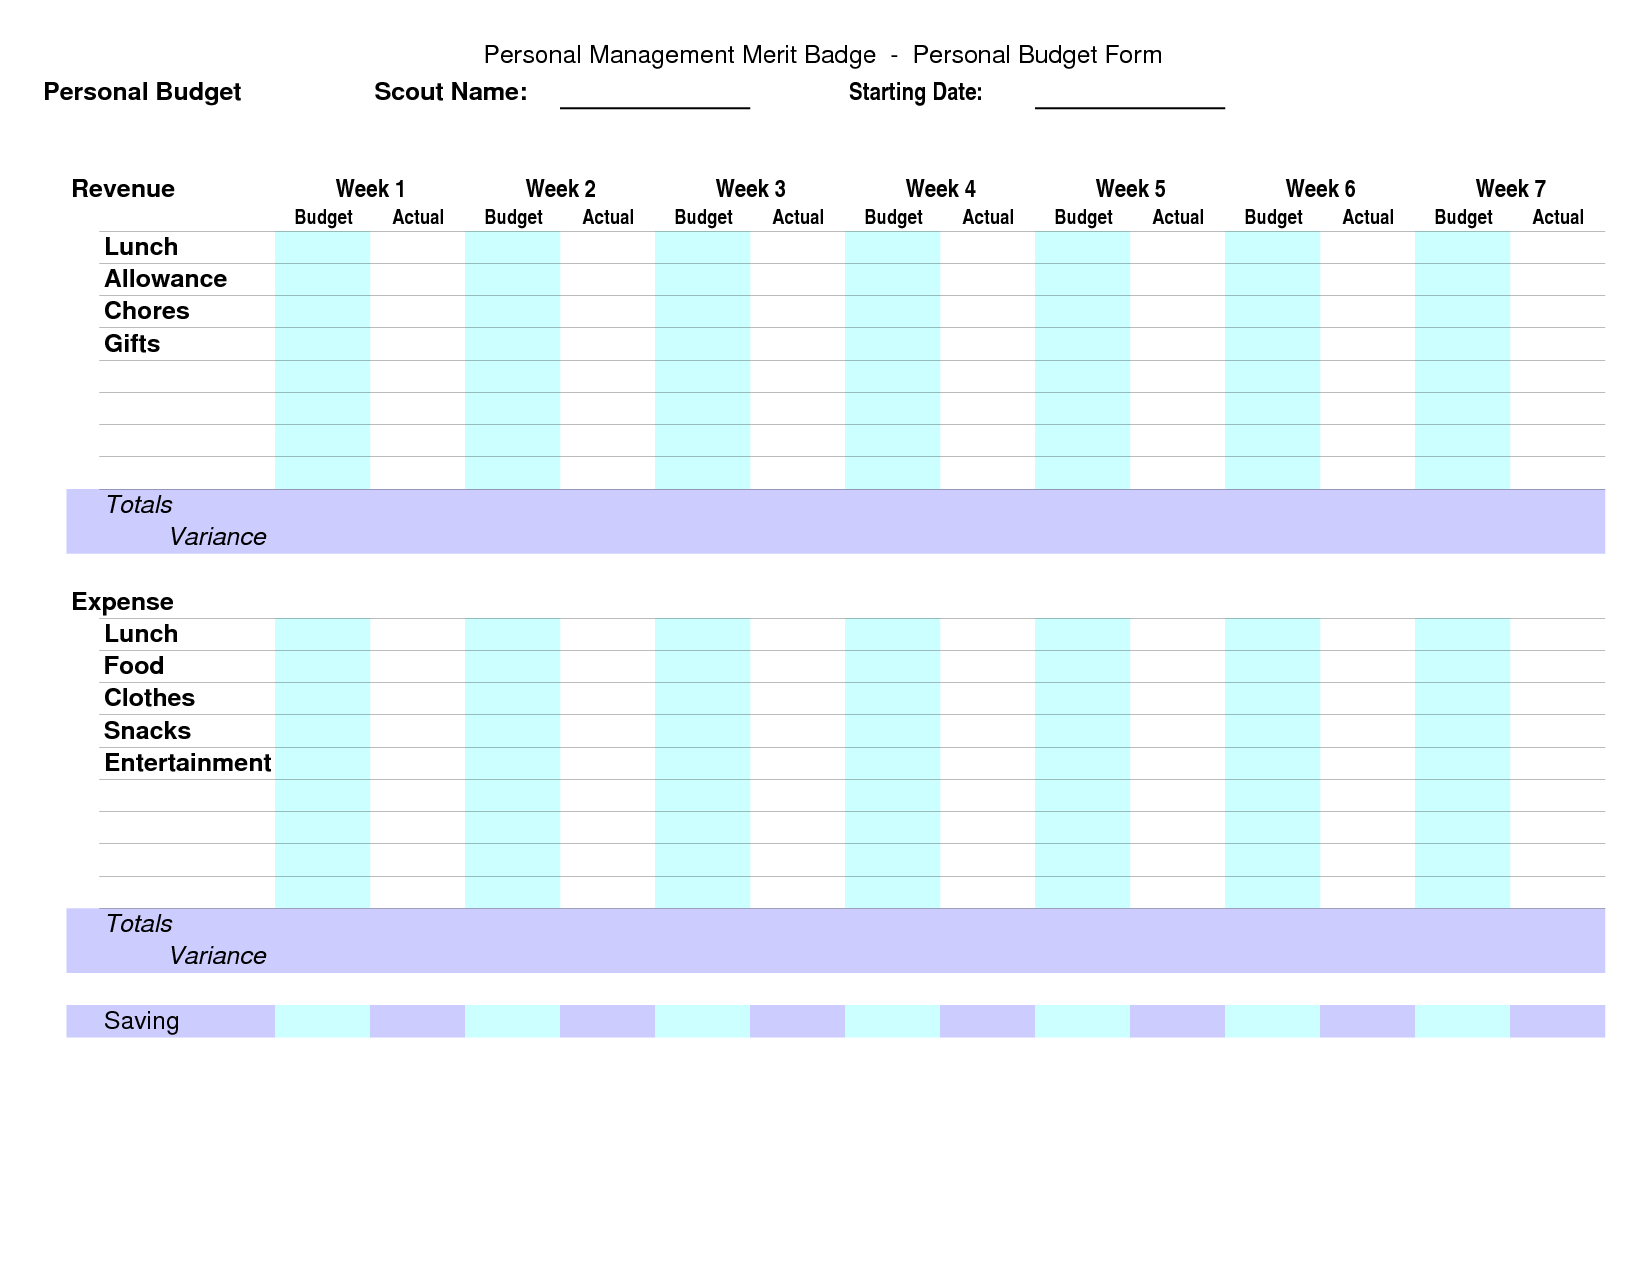 Personal Management Merit Badge Budget Spreadsheet Within Personal Managementrit Badge Chart Selo L Ink Co Spreadsheet Example